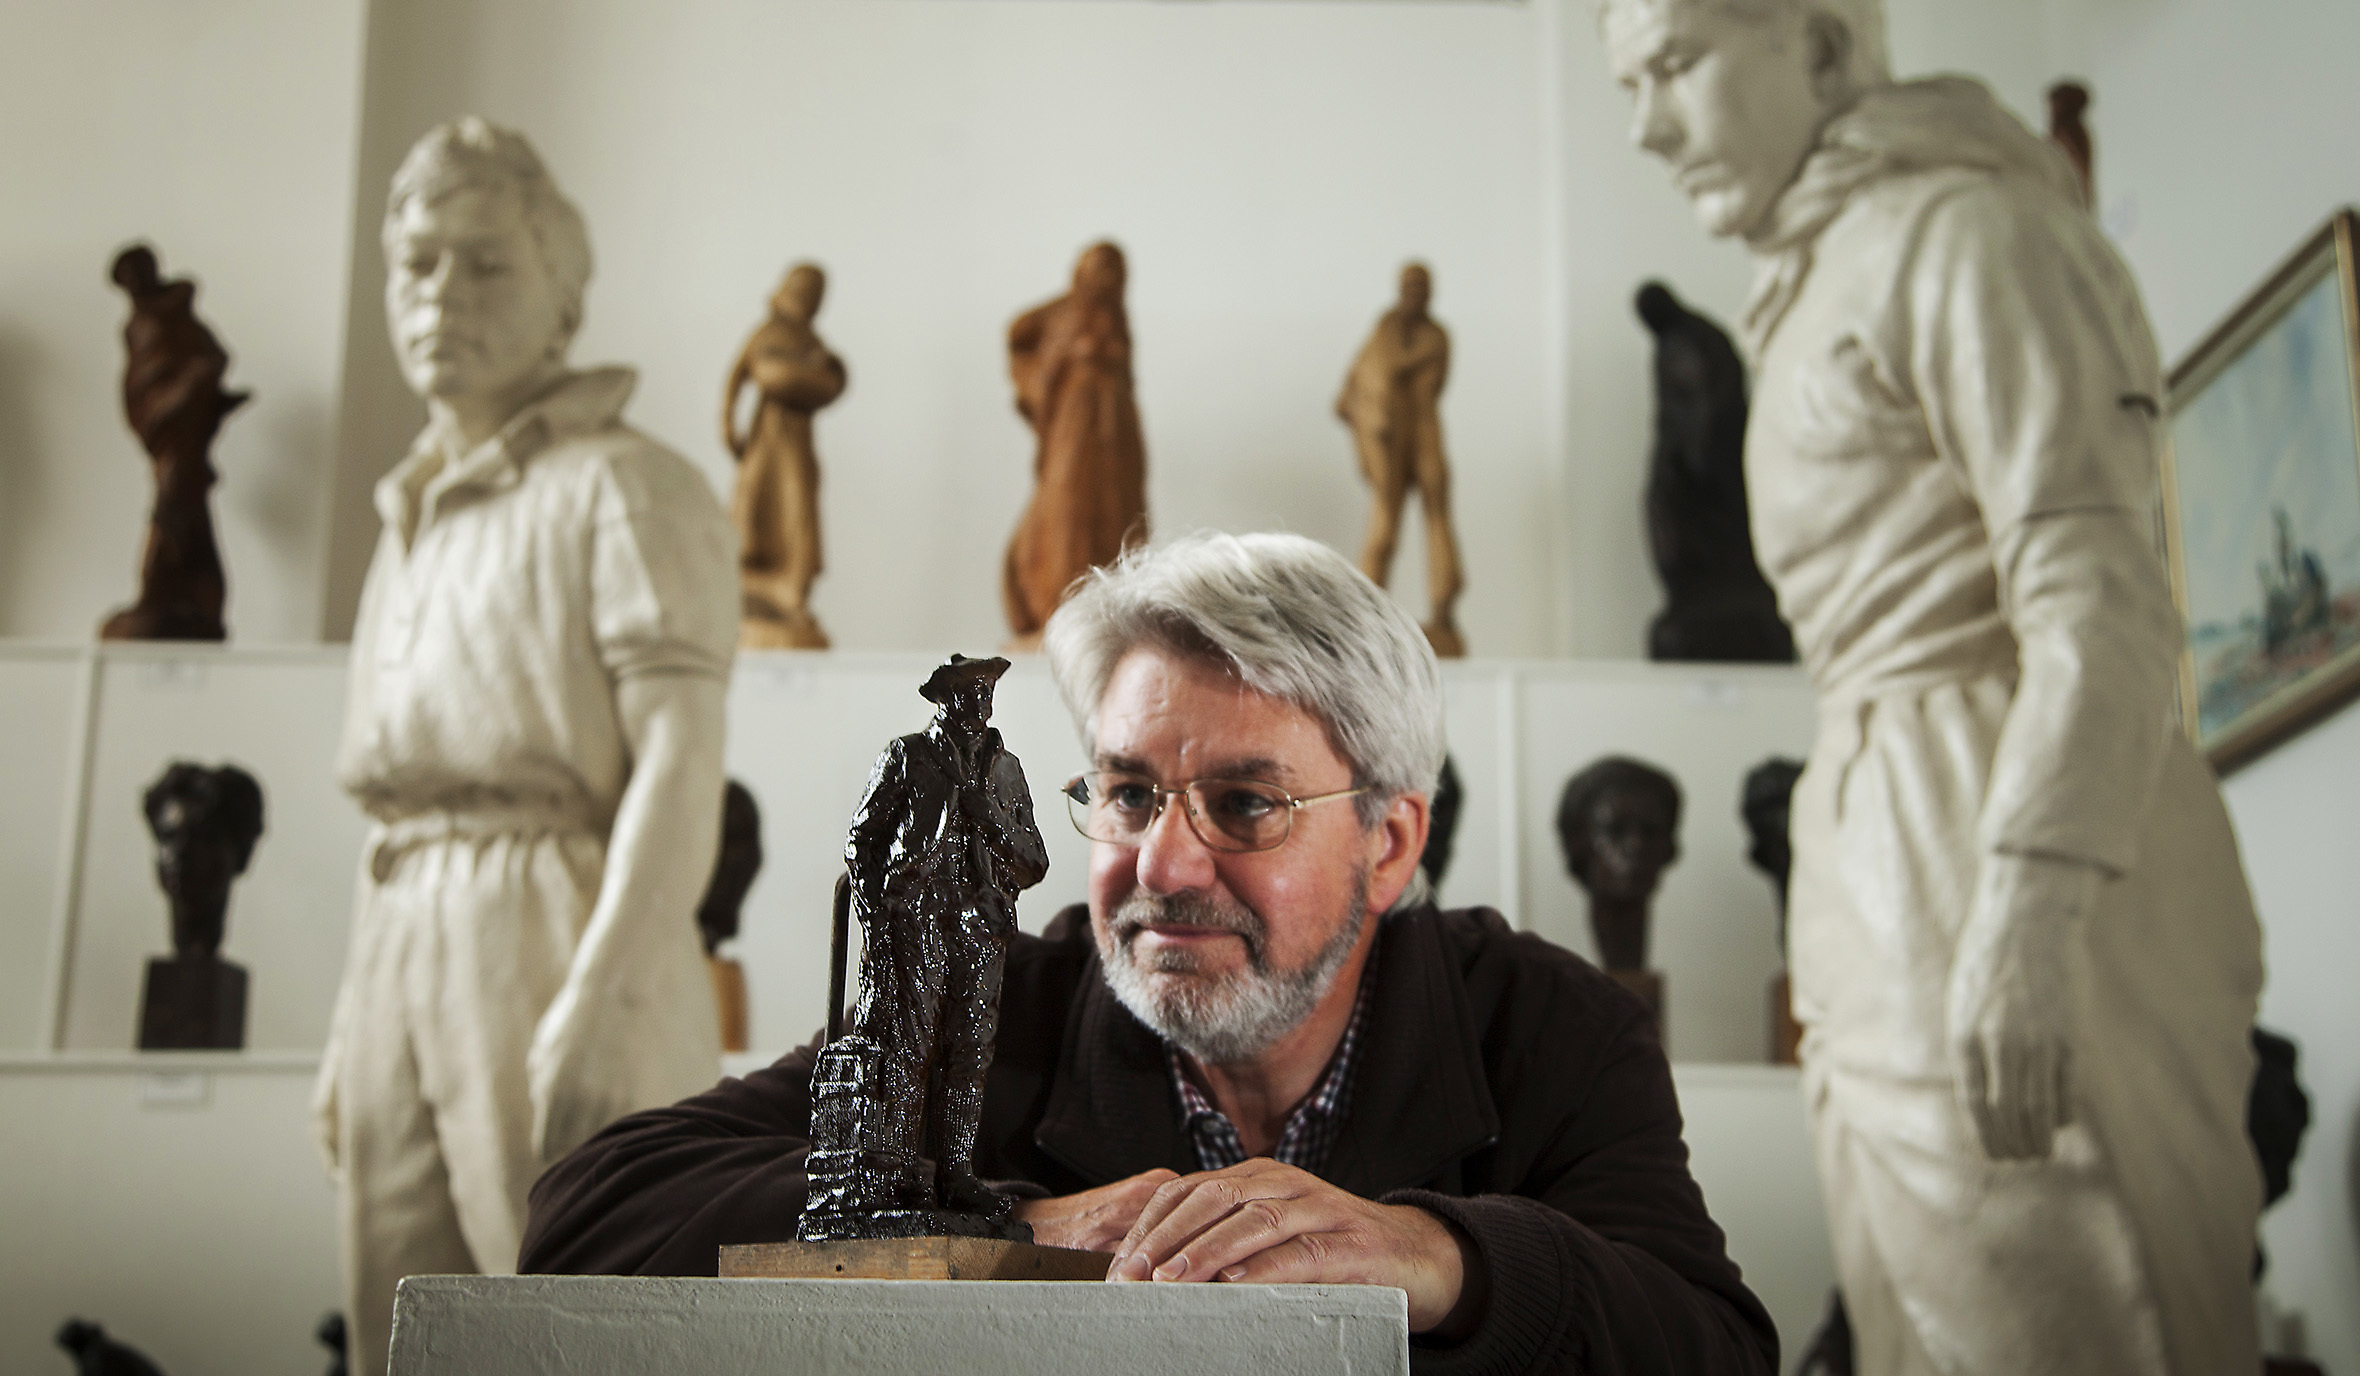 Norman Atkinson OBE with the plasticine figure, which will be stored after casting.